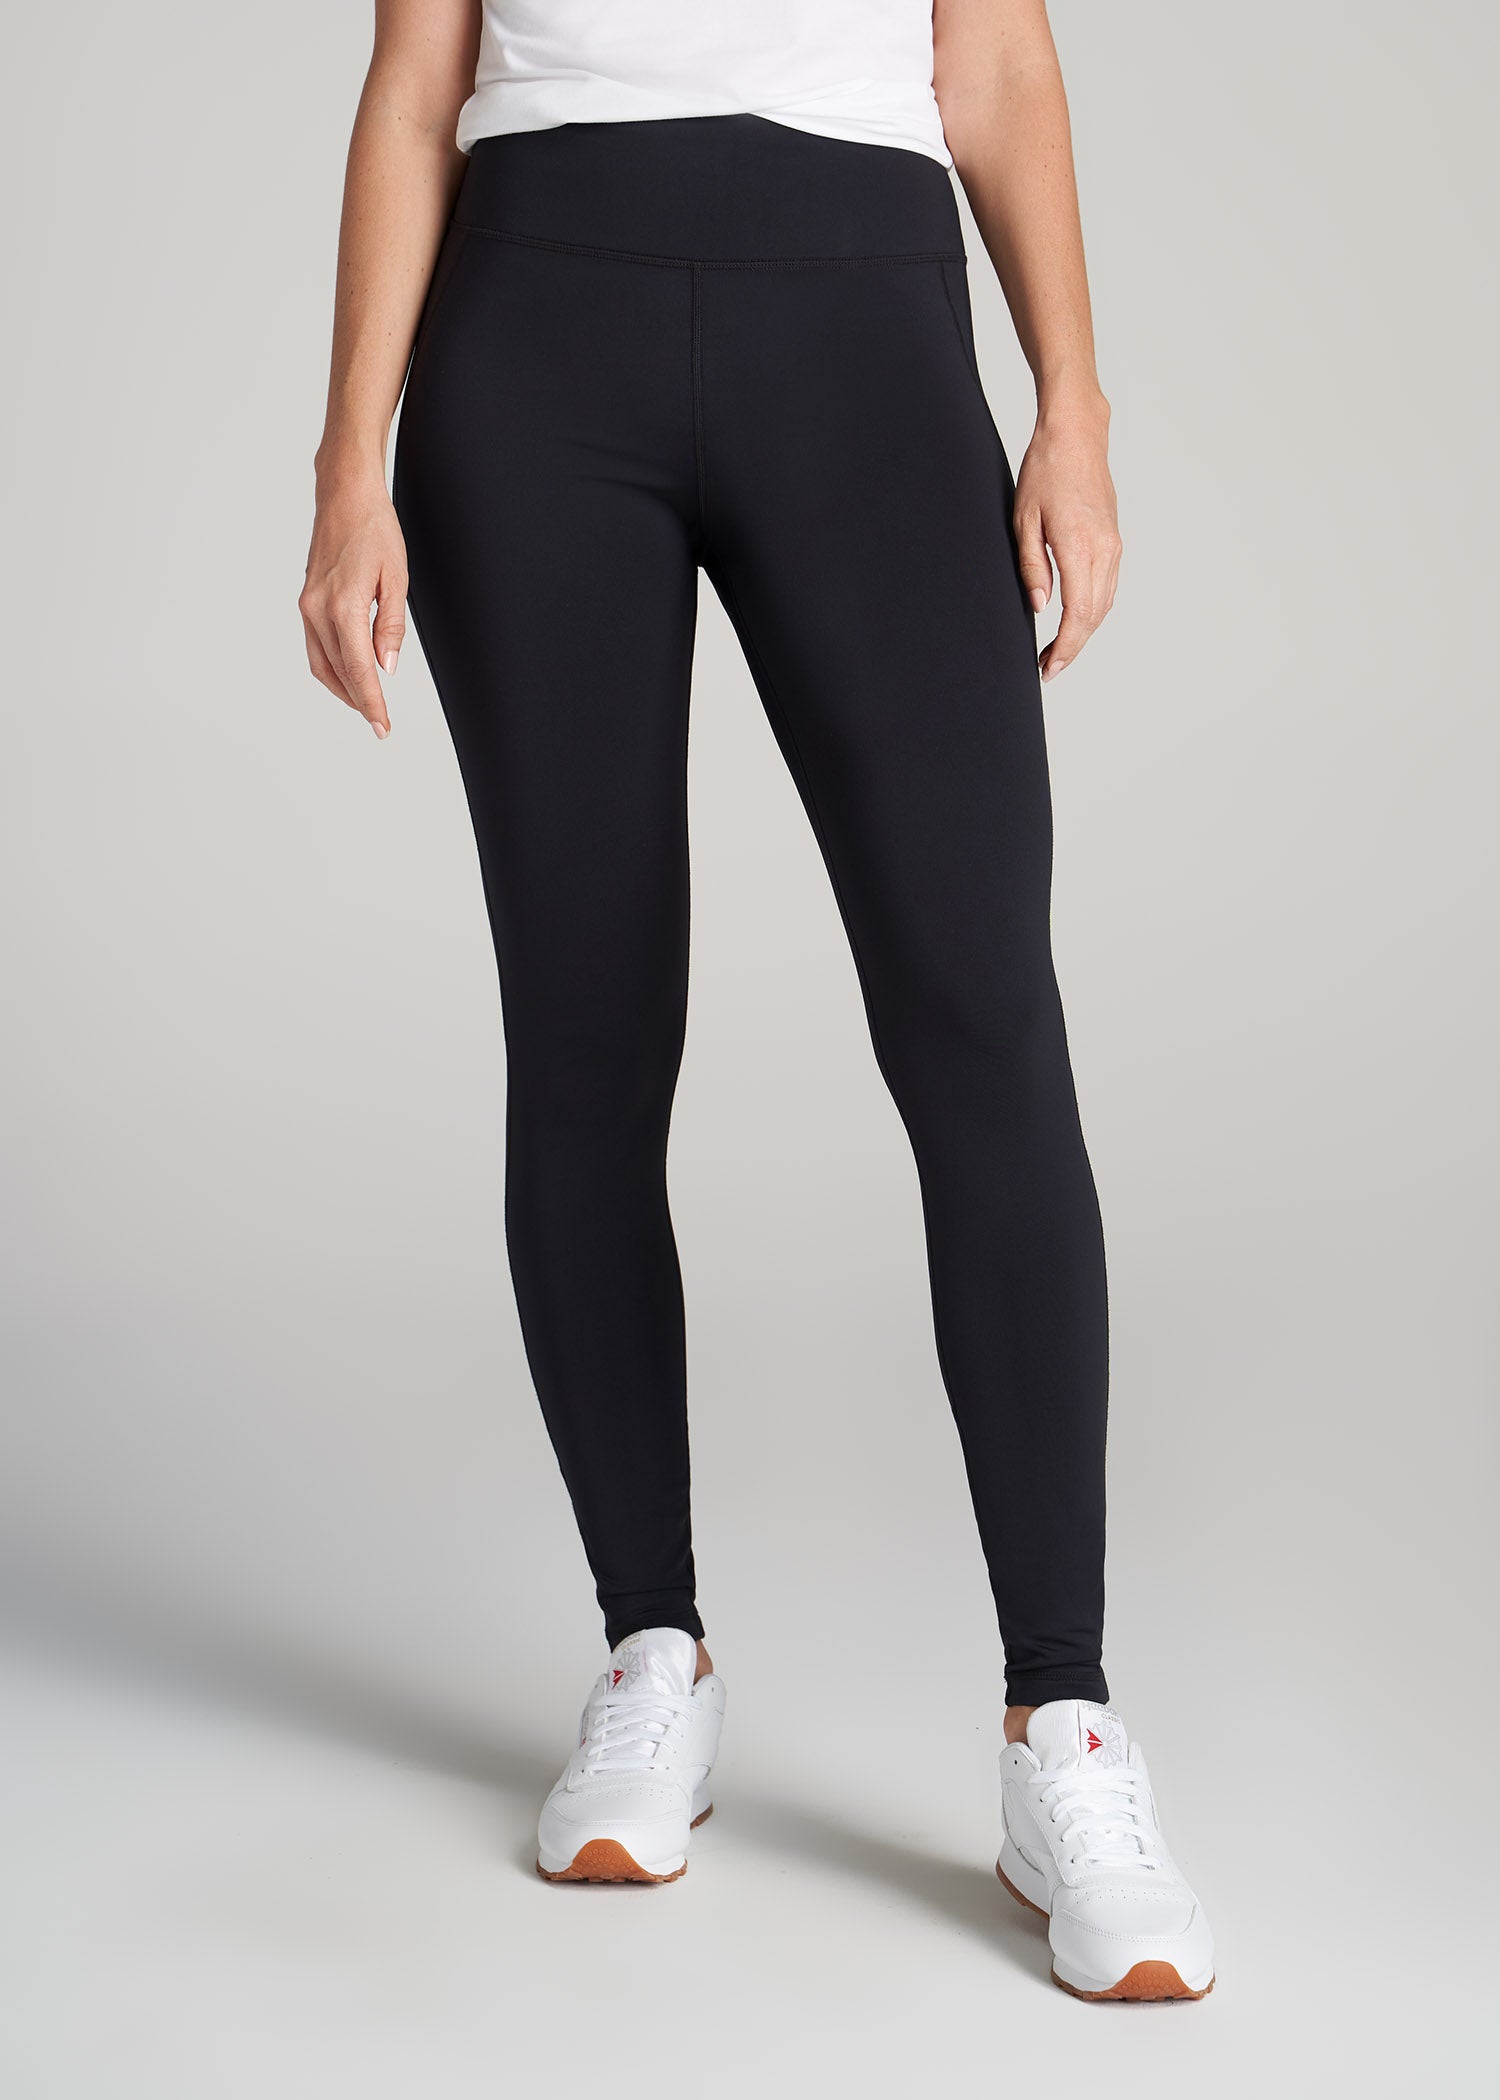 Plus Size 2 PACK Black Soft Touch Stretch Leggings